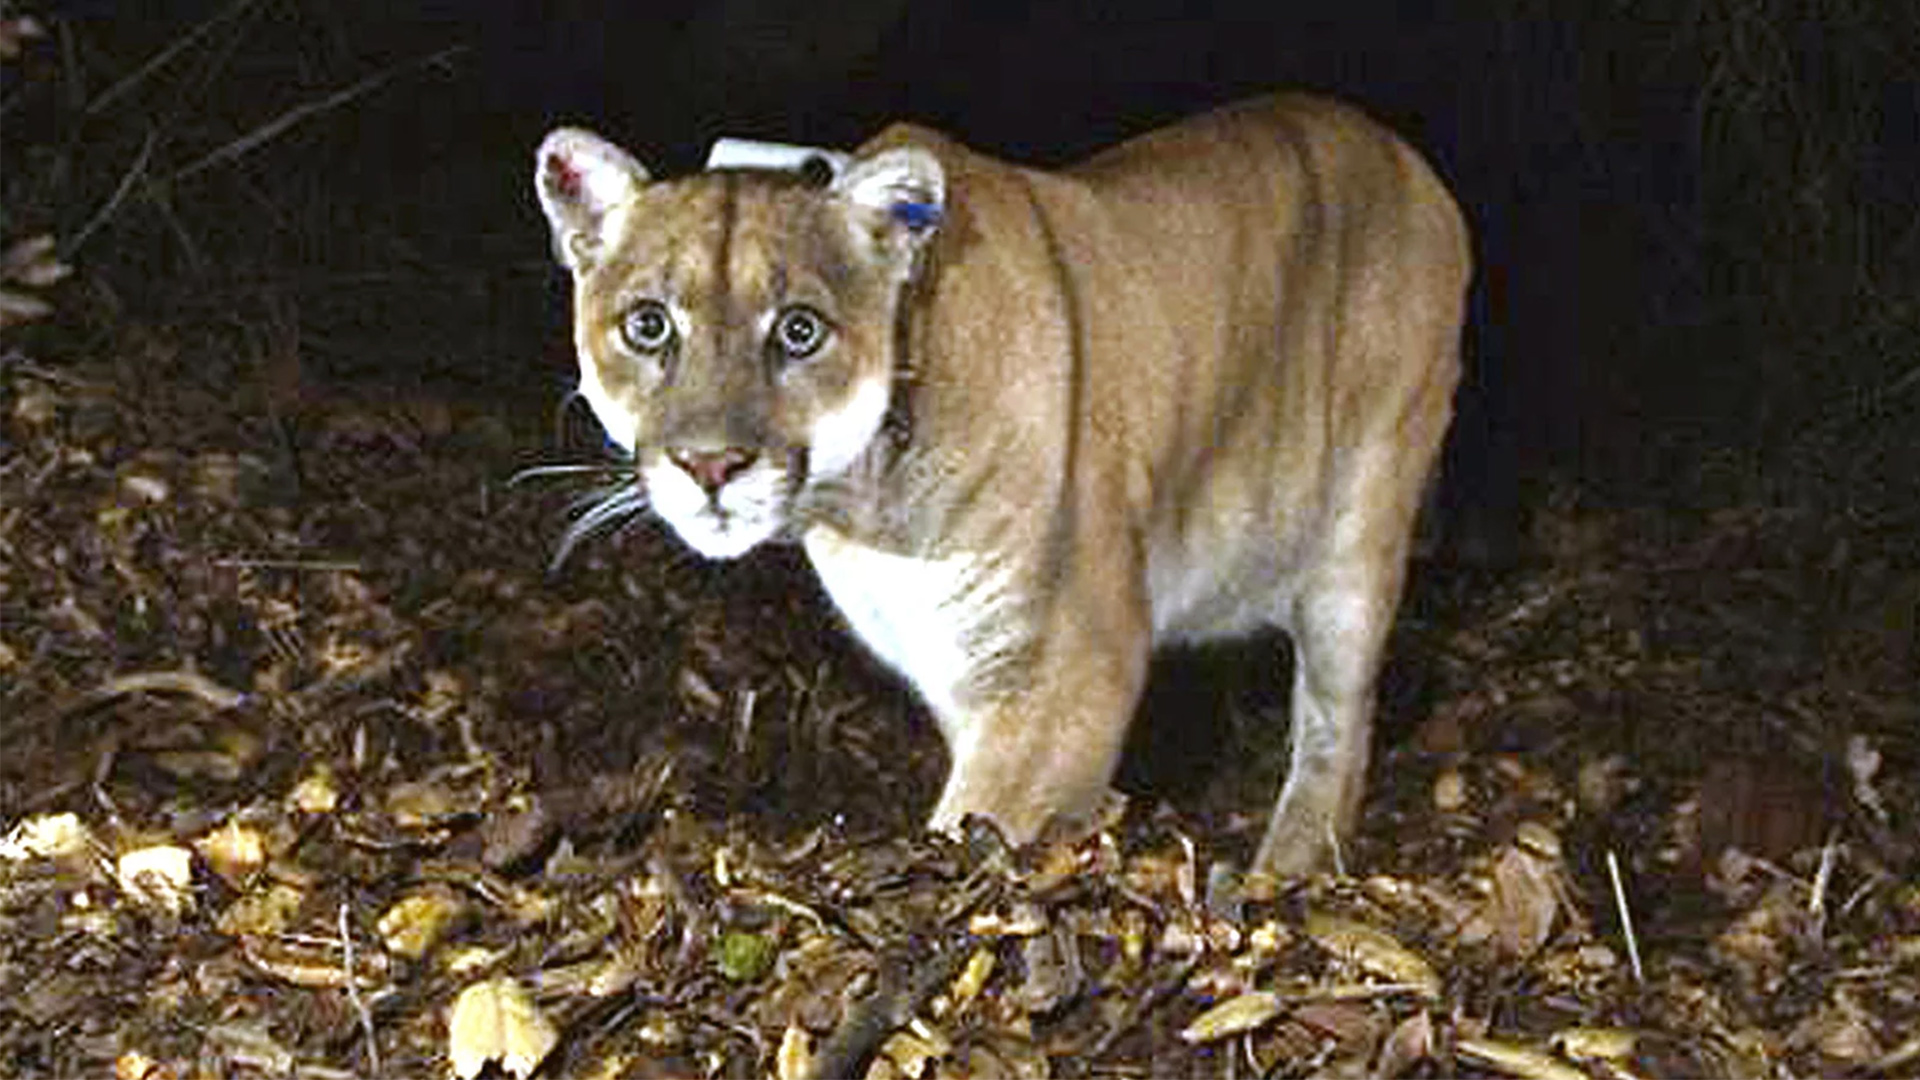 The mountain lion known as P-22, photographed in November 2014 in the Griffith Park area near downtown Los Angeles, is undergoing health evaluations after being captured on Monday.